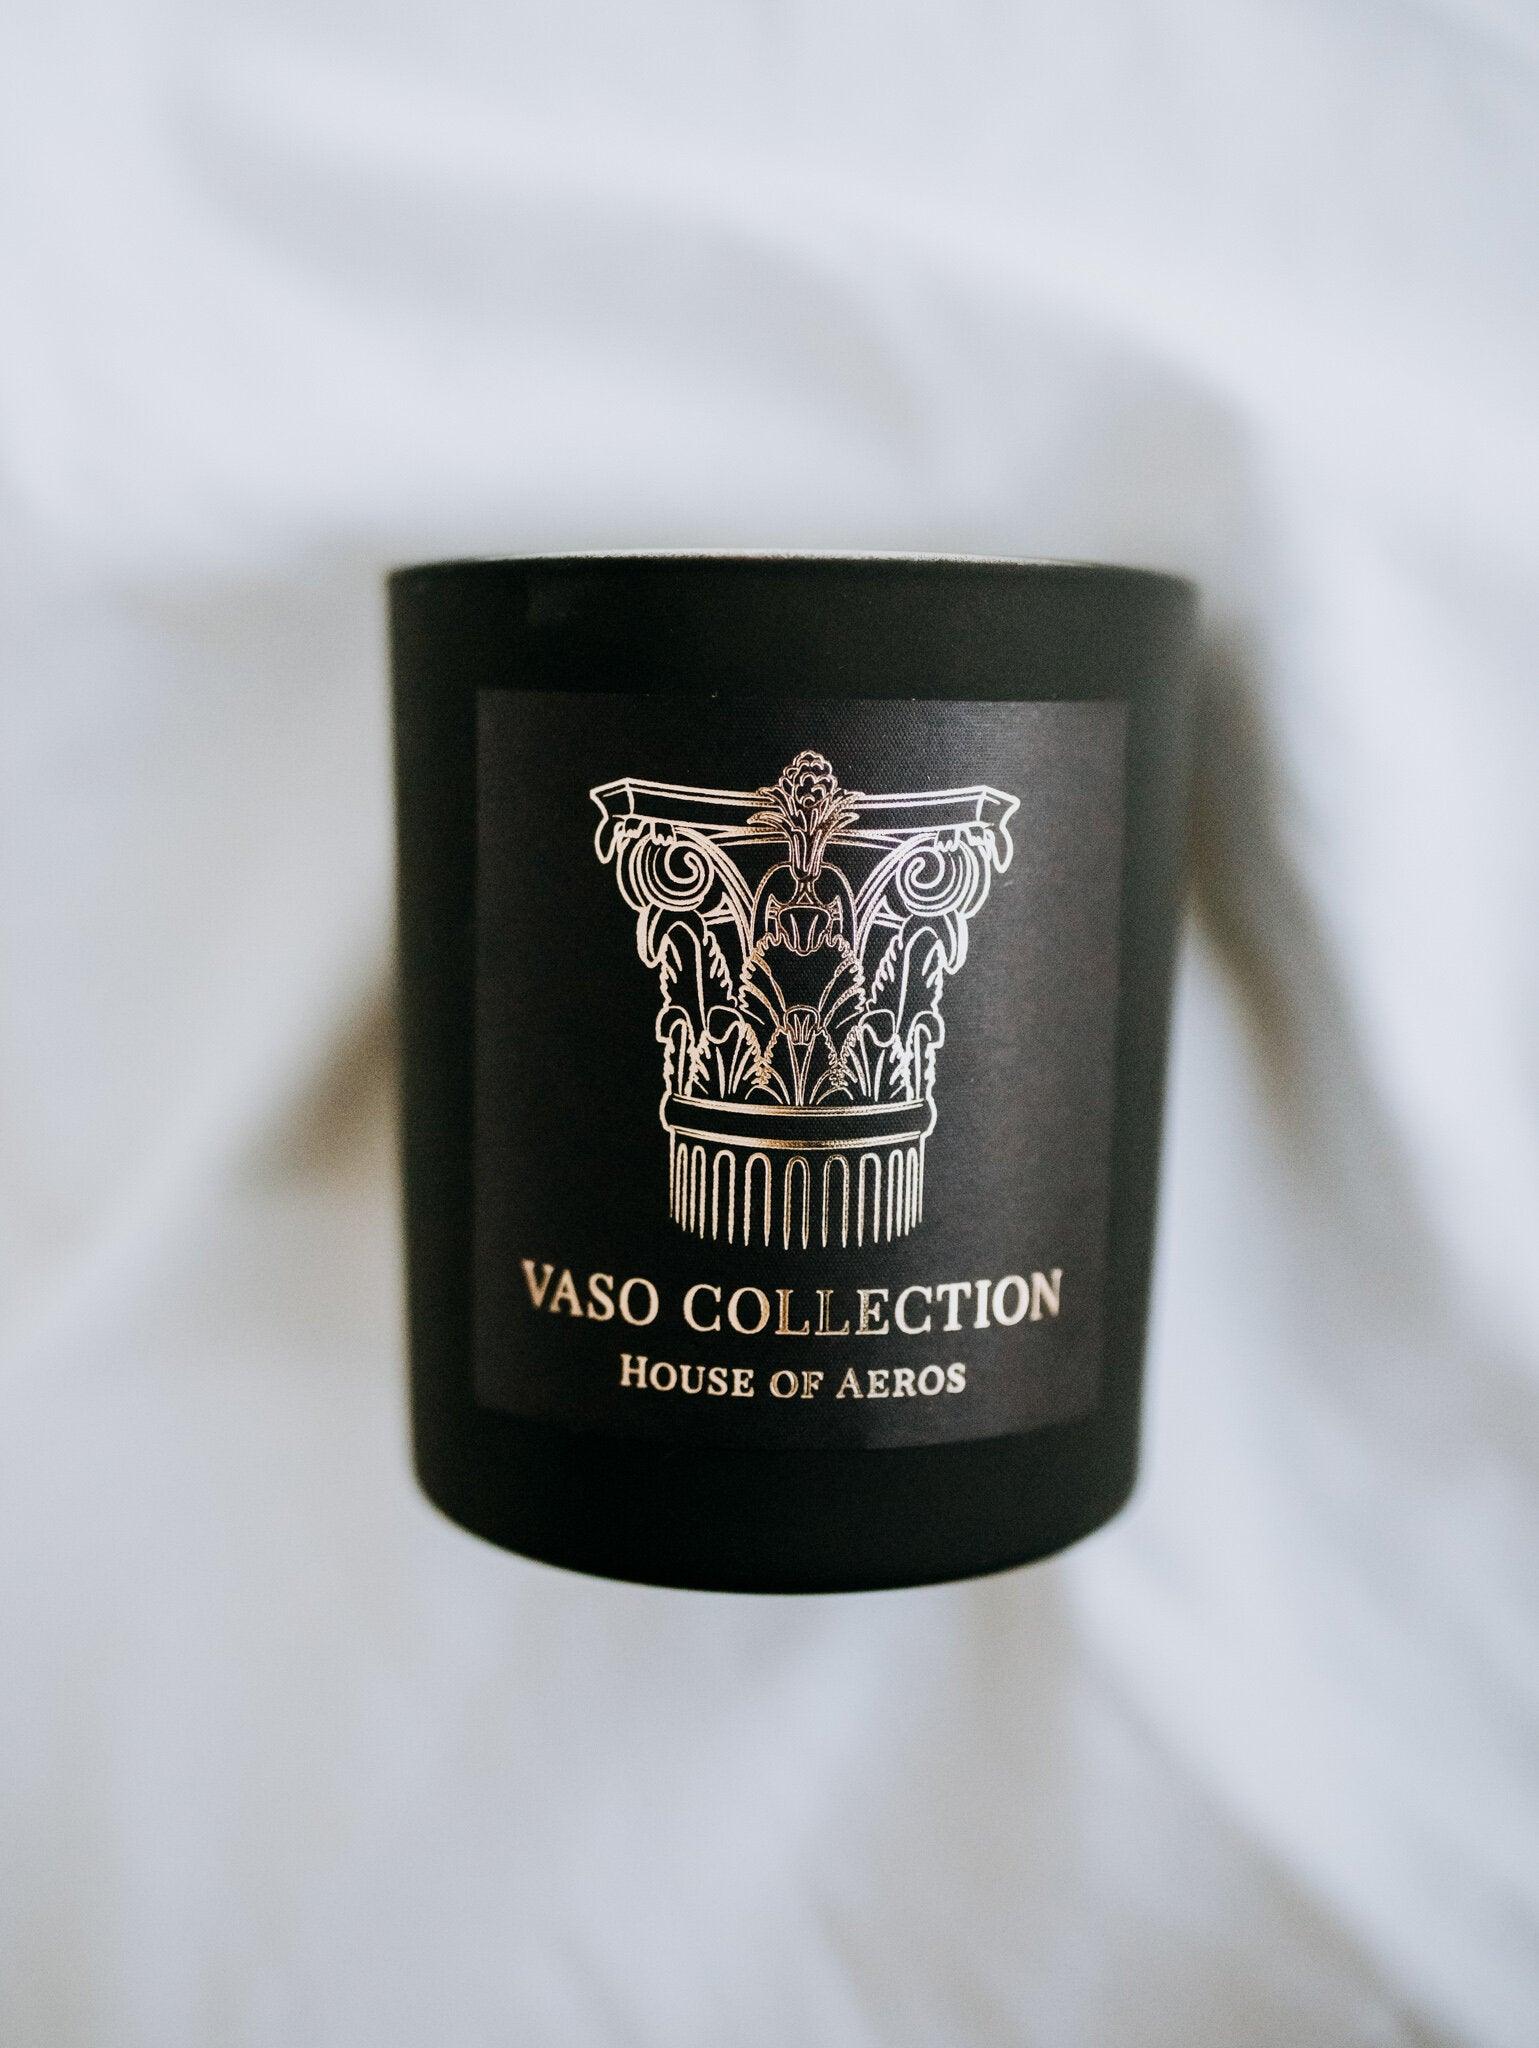 The Vaso Collection - House of Aeros